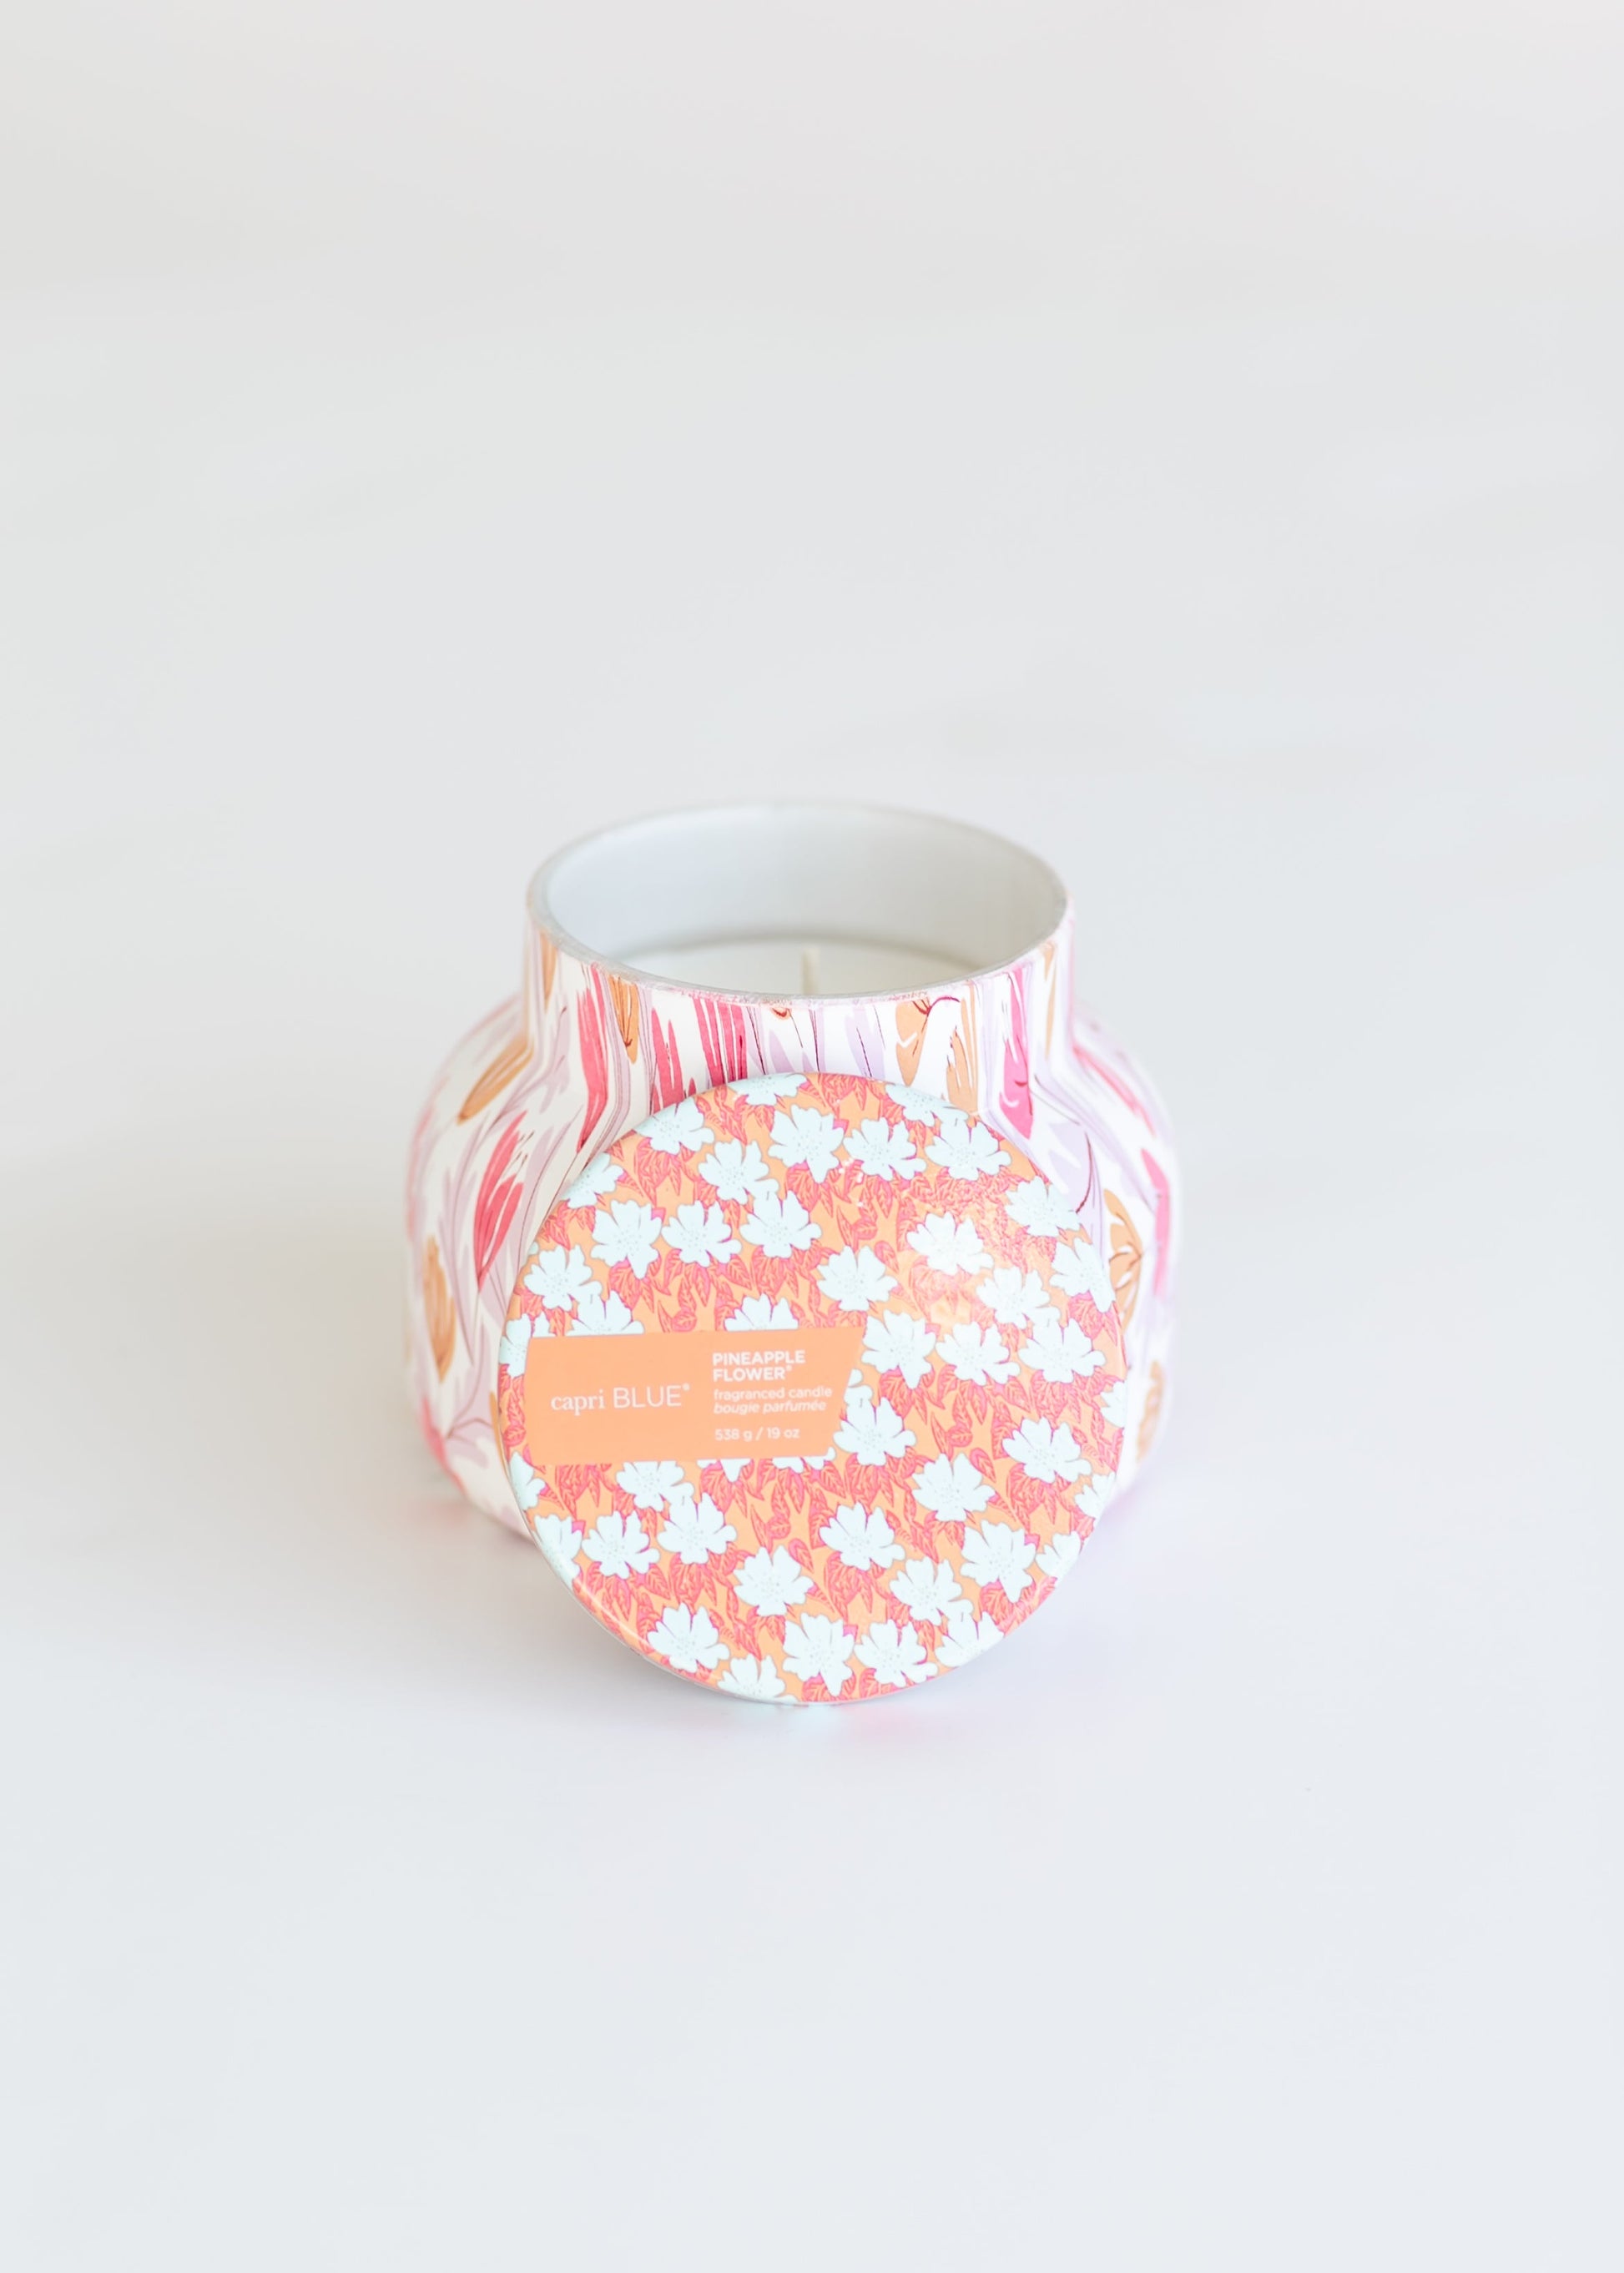 Capri Blue Pattern Play Jar Candle Gifts Pineapple Flower